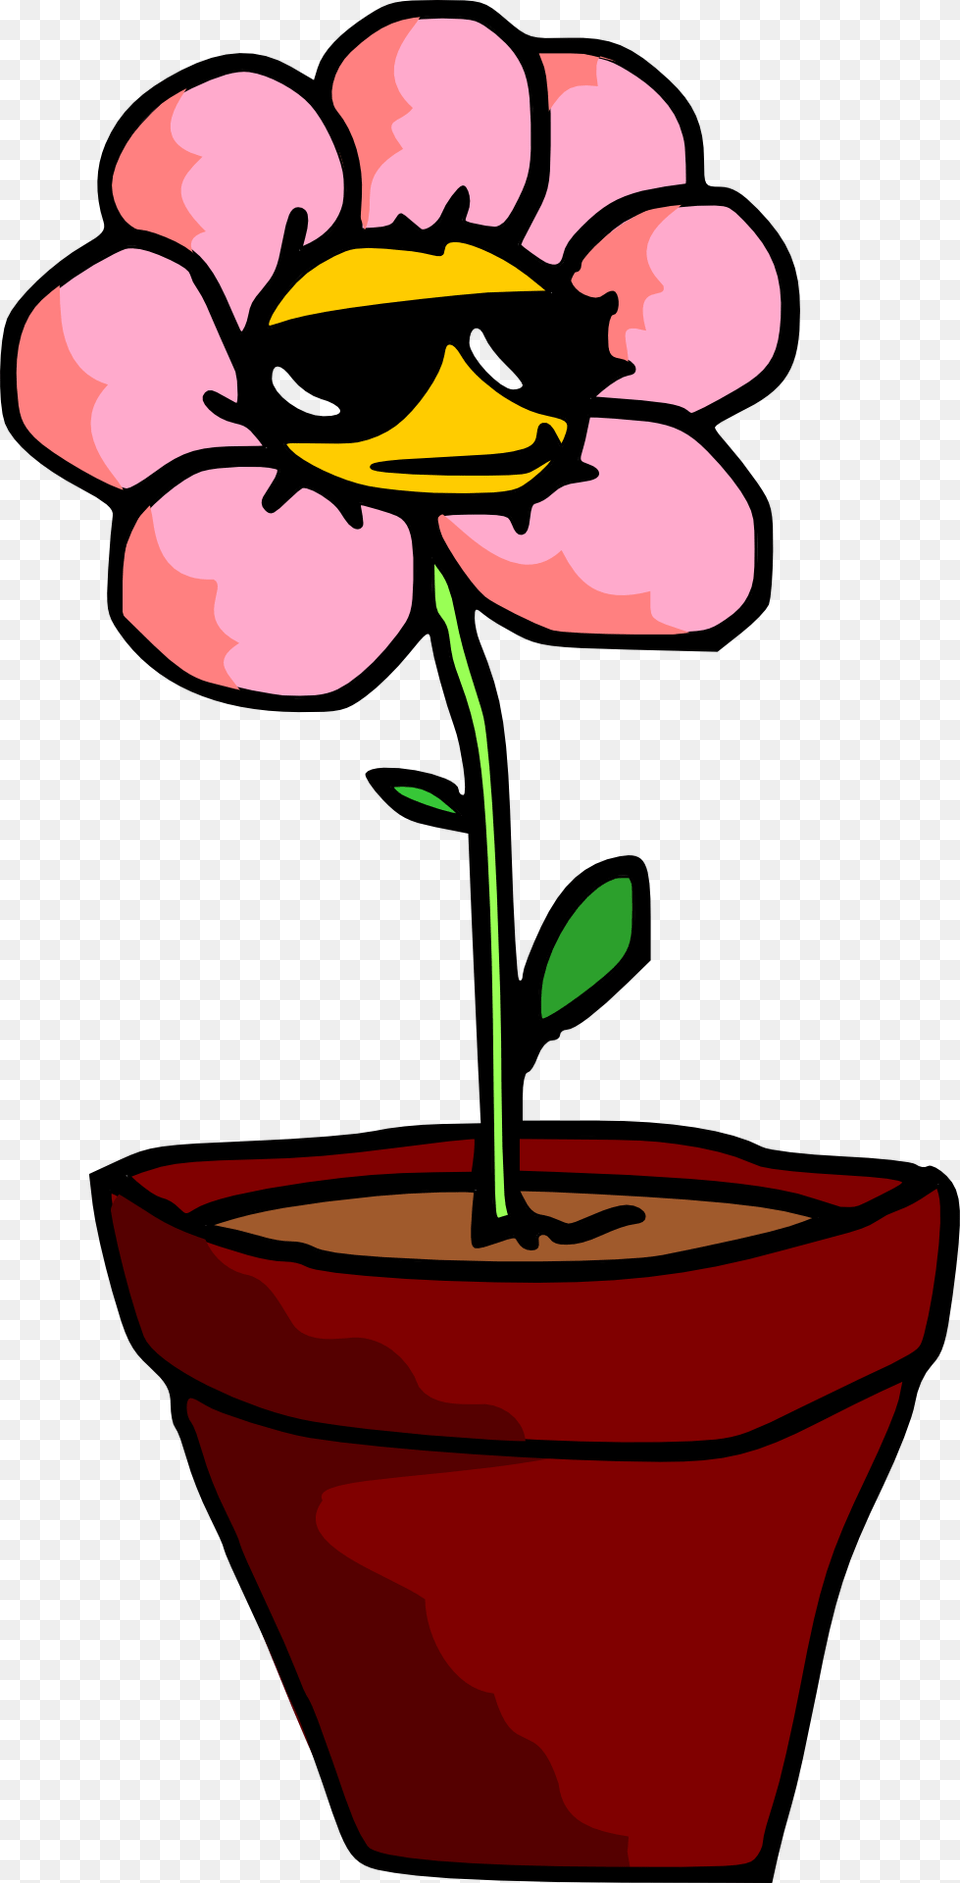 Potted Plants And Flowers Cartoon Potted Plant Transparent, Flower, Petal, Potted Plant, Baby Free Png Download